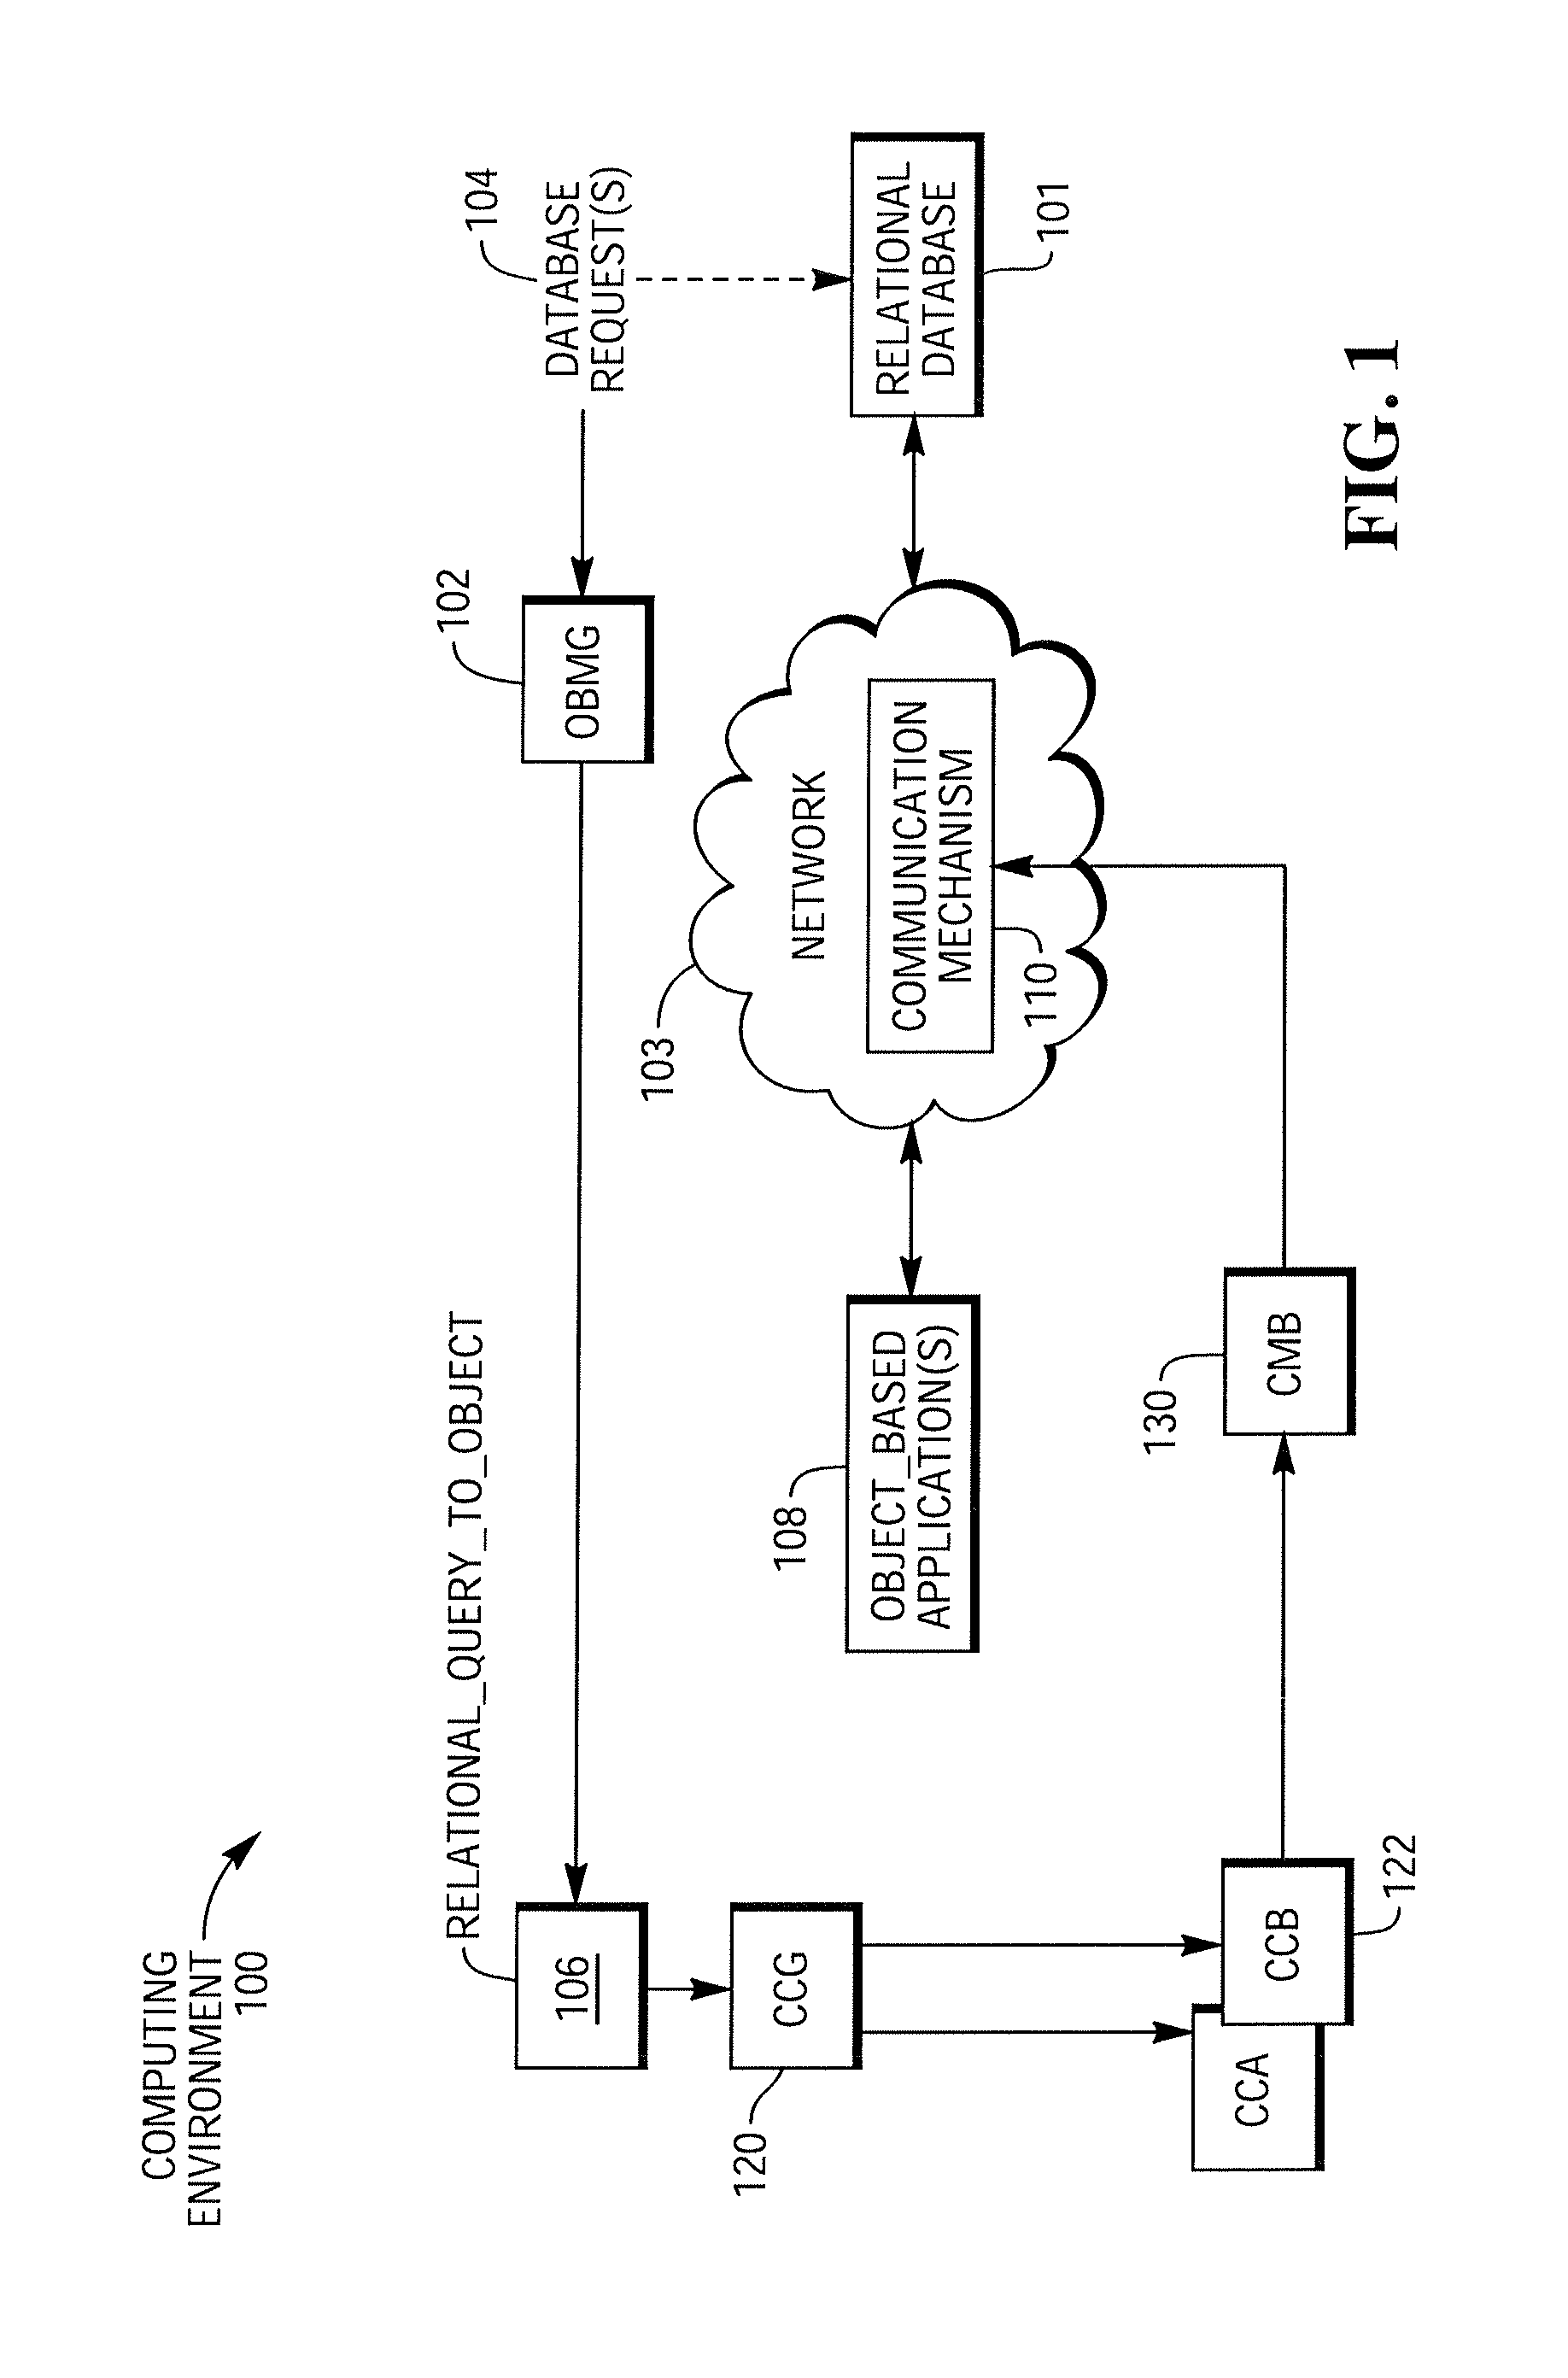 Query derived communication mechanism for communication between relational databases and object-based computing environments and systems